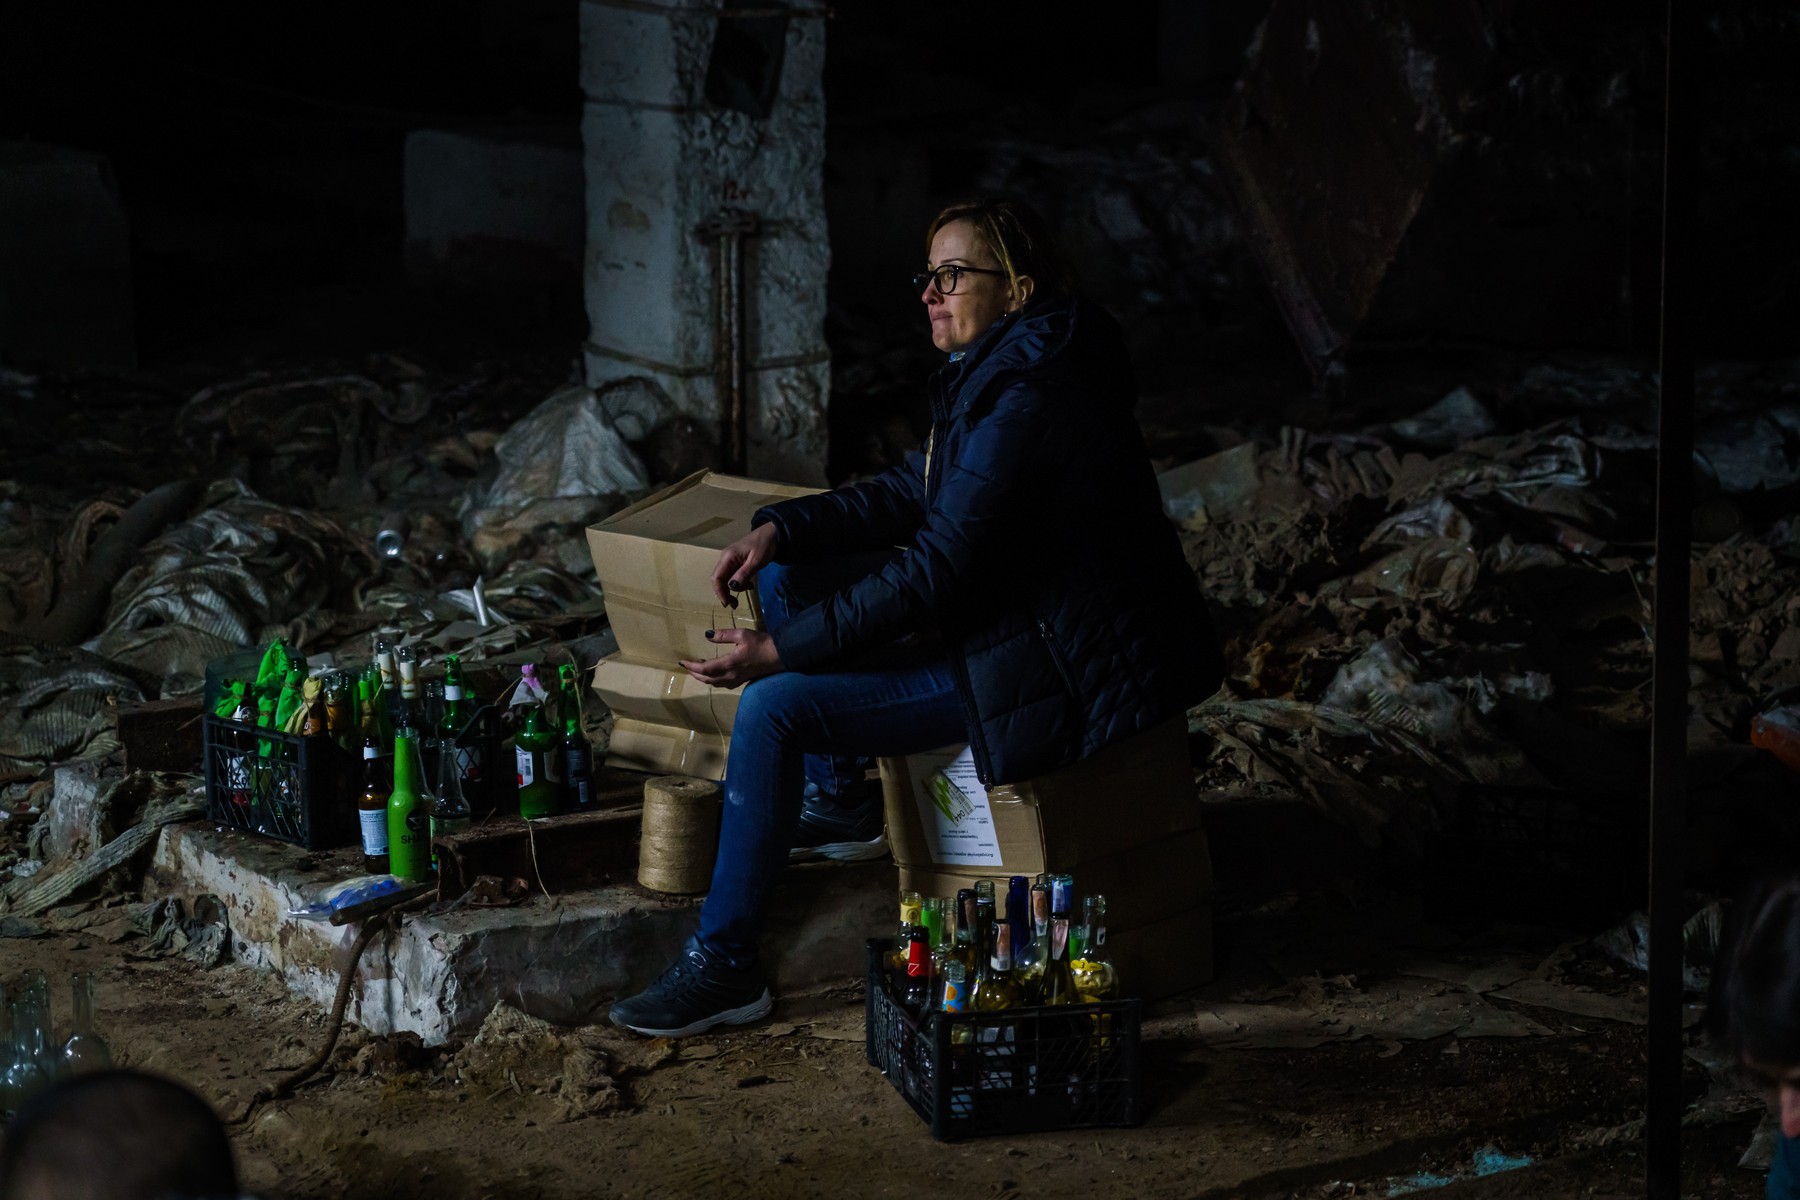 A woman rests as the and other volunteers from the Territorial Defense Units make Molotov cocktails to use against the invading Russian troops in Kyiv, Ukraine, Saturday, Feb. 26, 2022. (MARCUS YAM / LOS ANGELES TIMES)
UKRAINE RUSSIA CRISIS, Kyiv, Kyiv Oblast, Ukraine - 26 Feb 2022,Image: 665267709, License: Rights-managed, Restrictions: , Model Release: no, Credit line: Profimedia